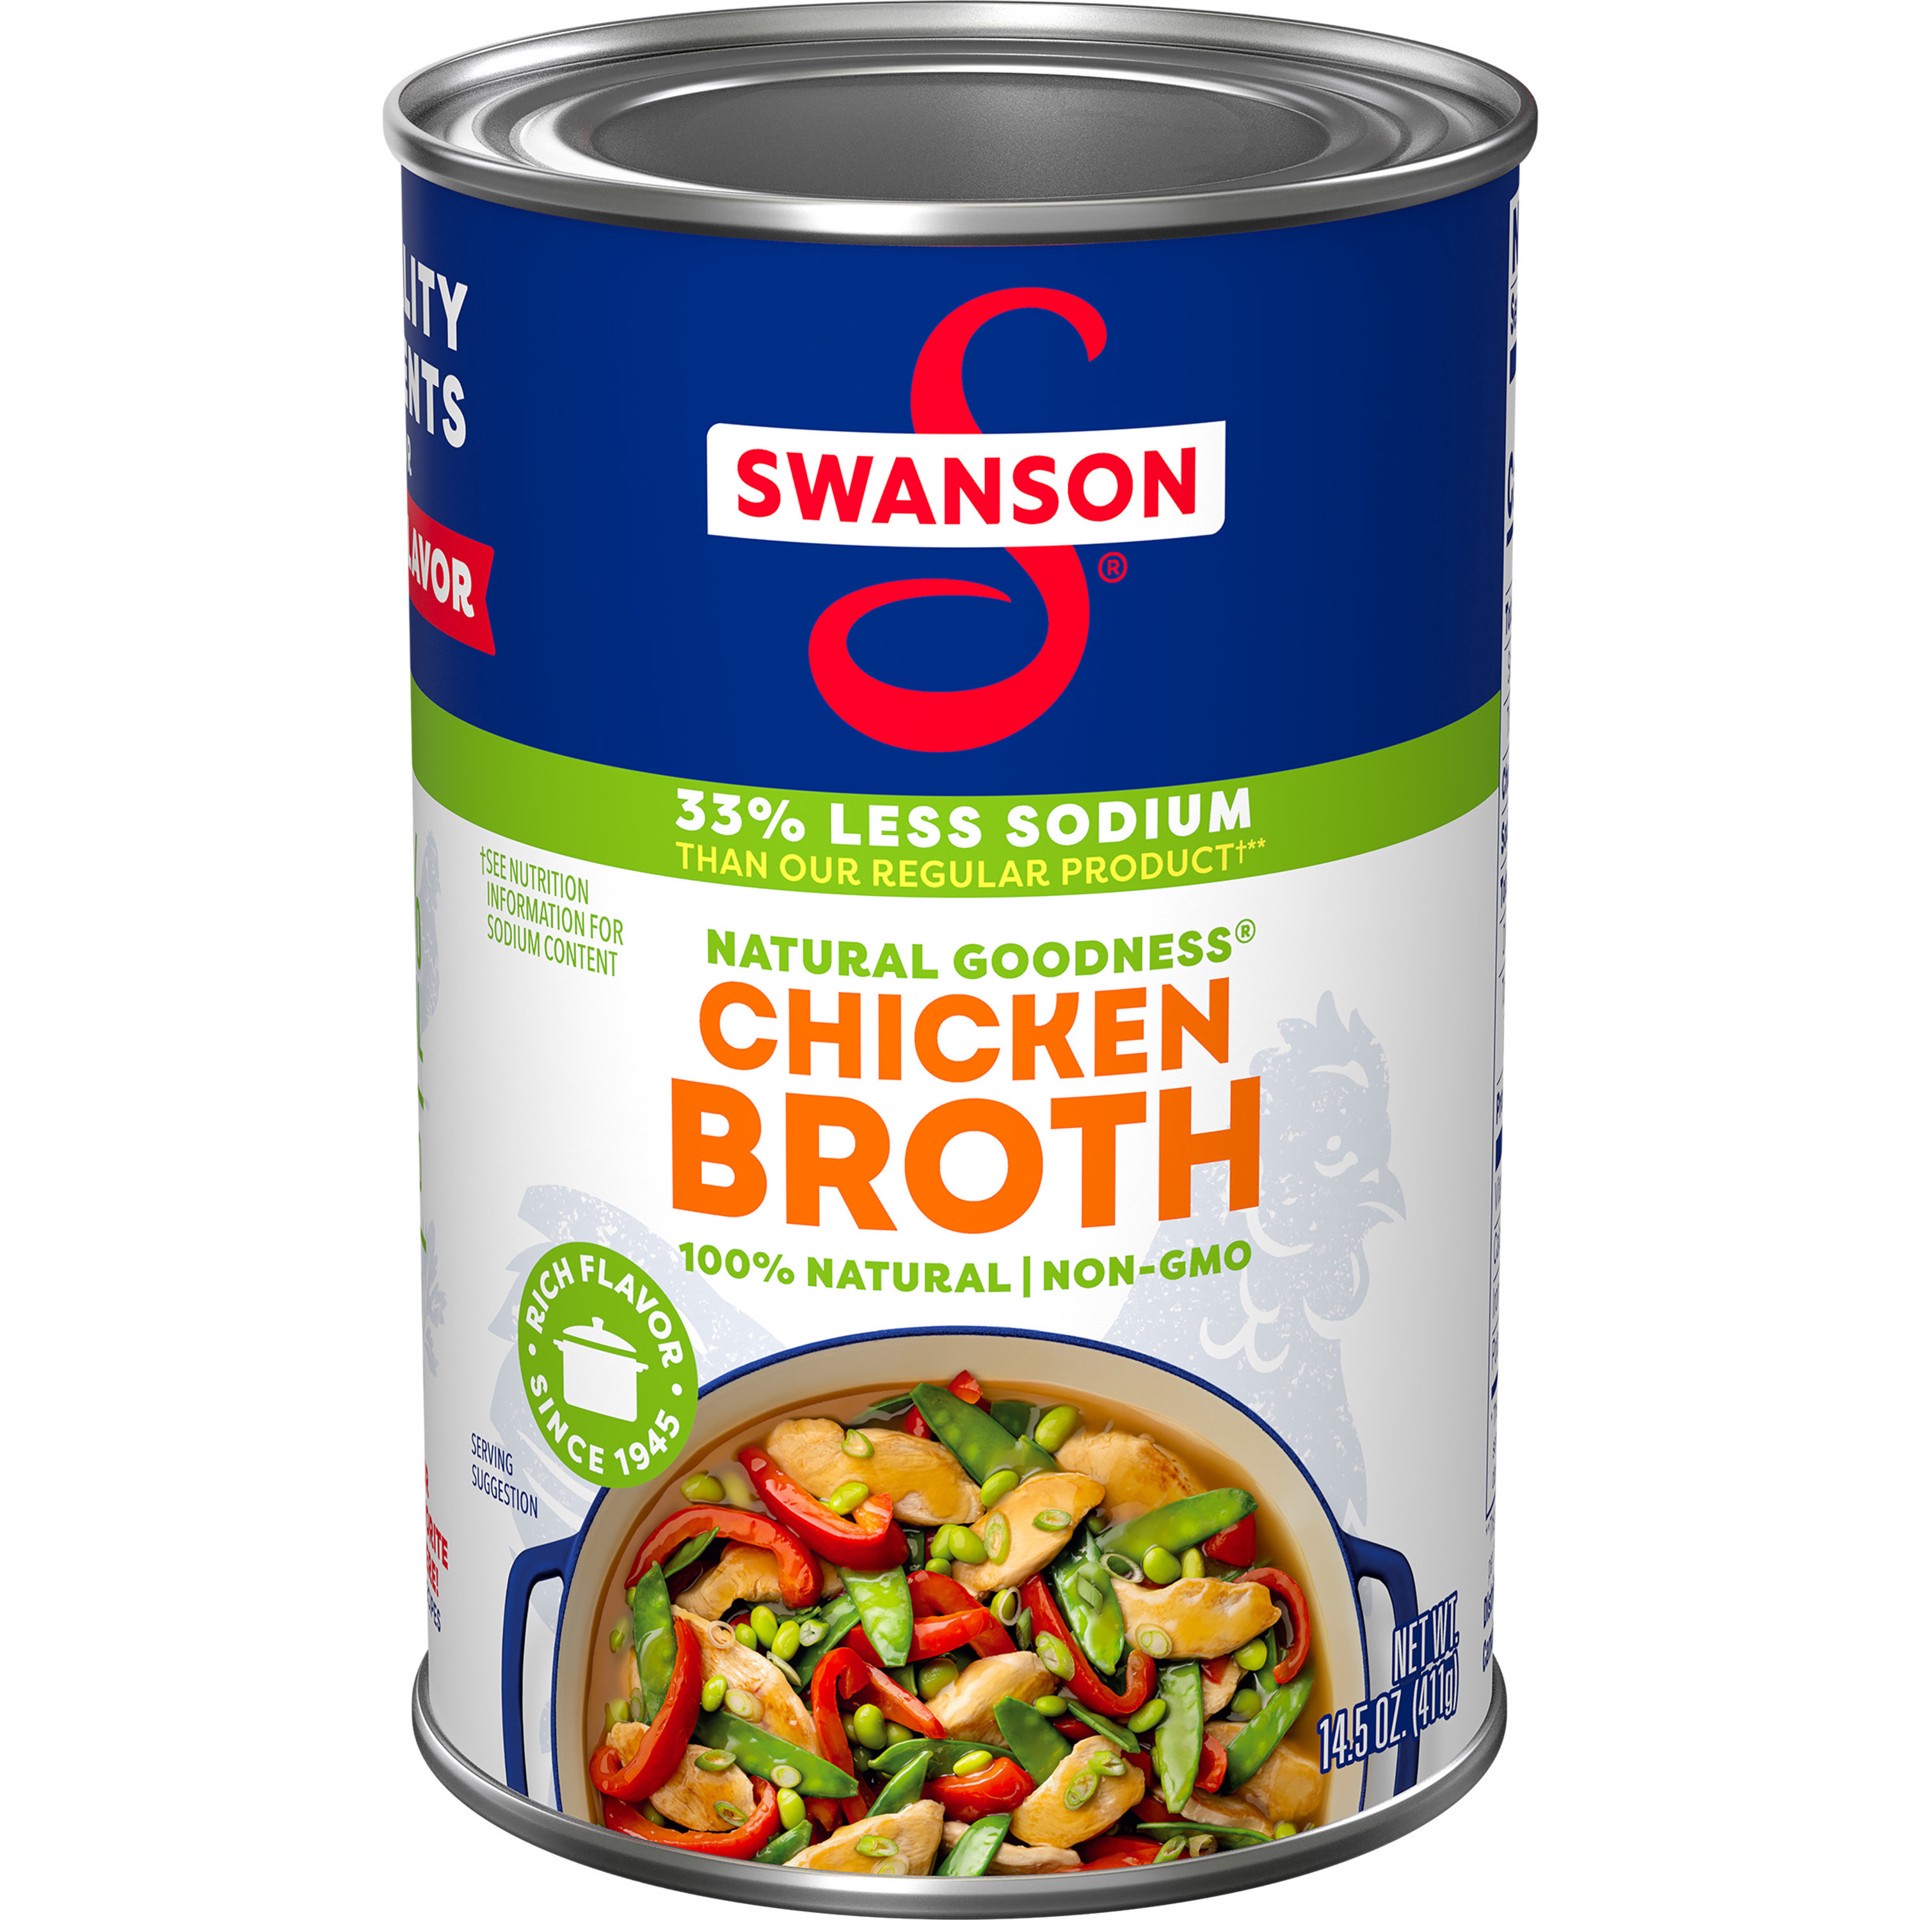 slide 1 of 5, Swanson Natural Goodness 33% Less Sodium Chicken Broth, 14.5 oz Can, 14.5 oz